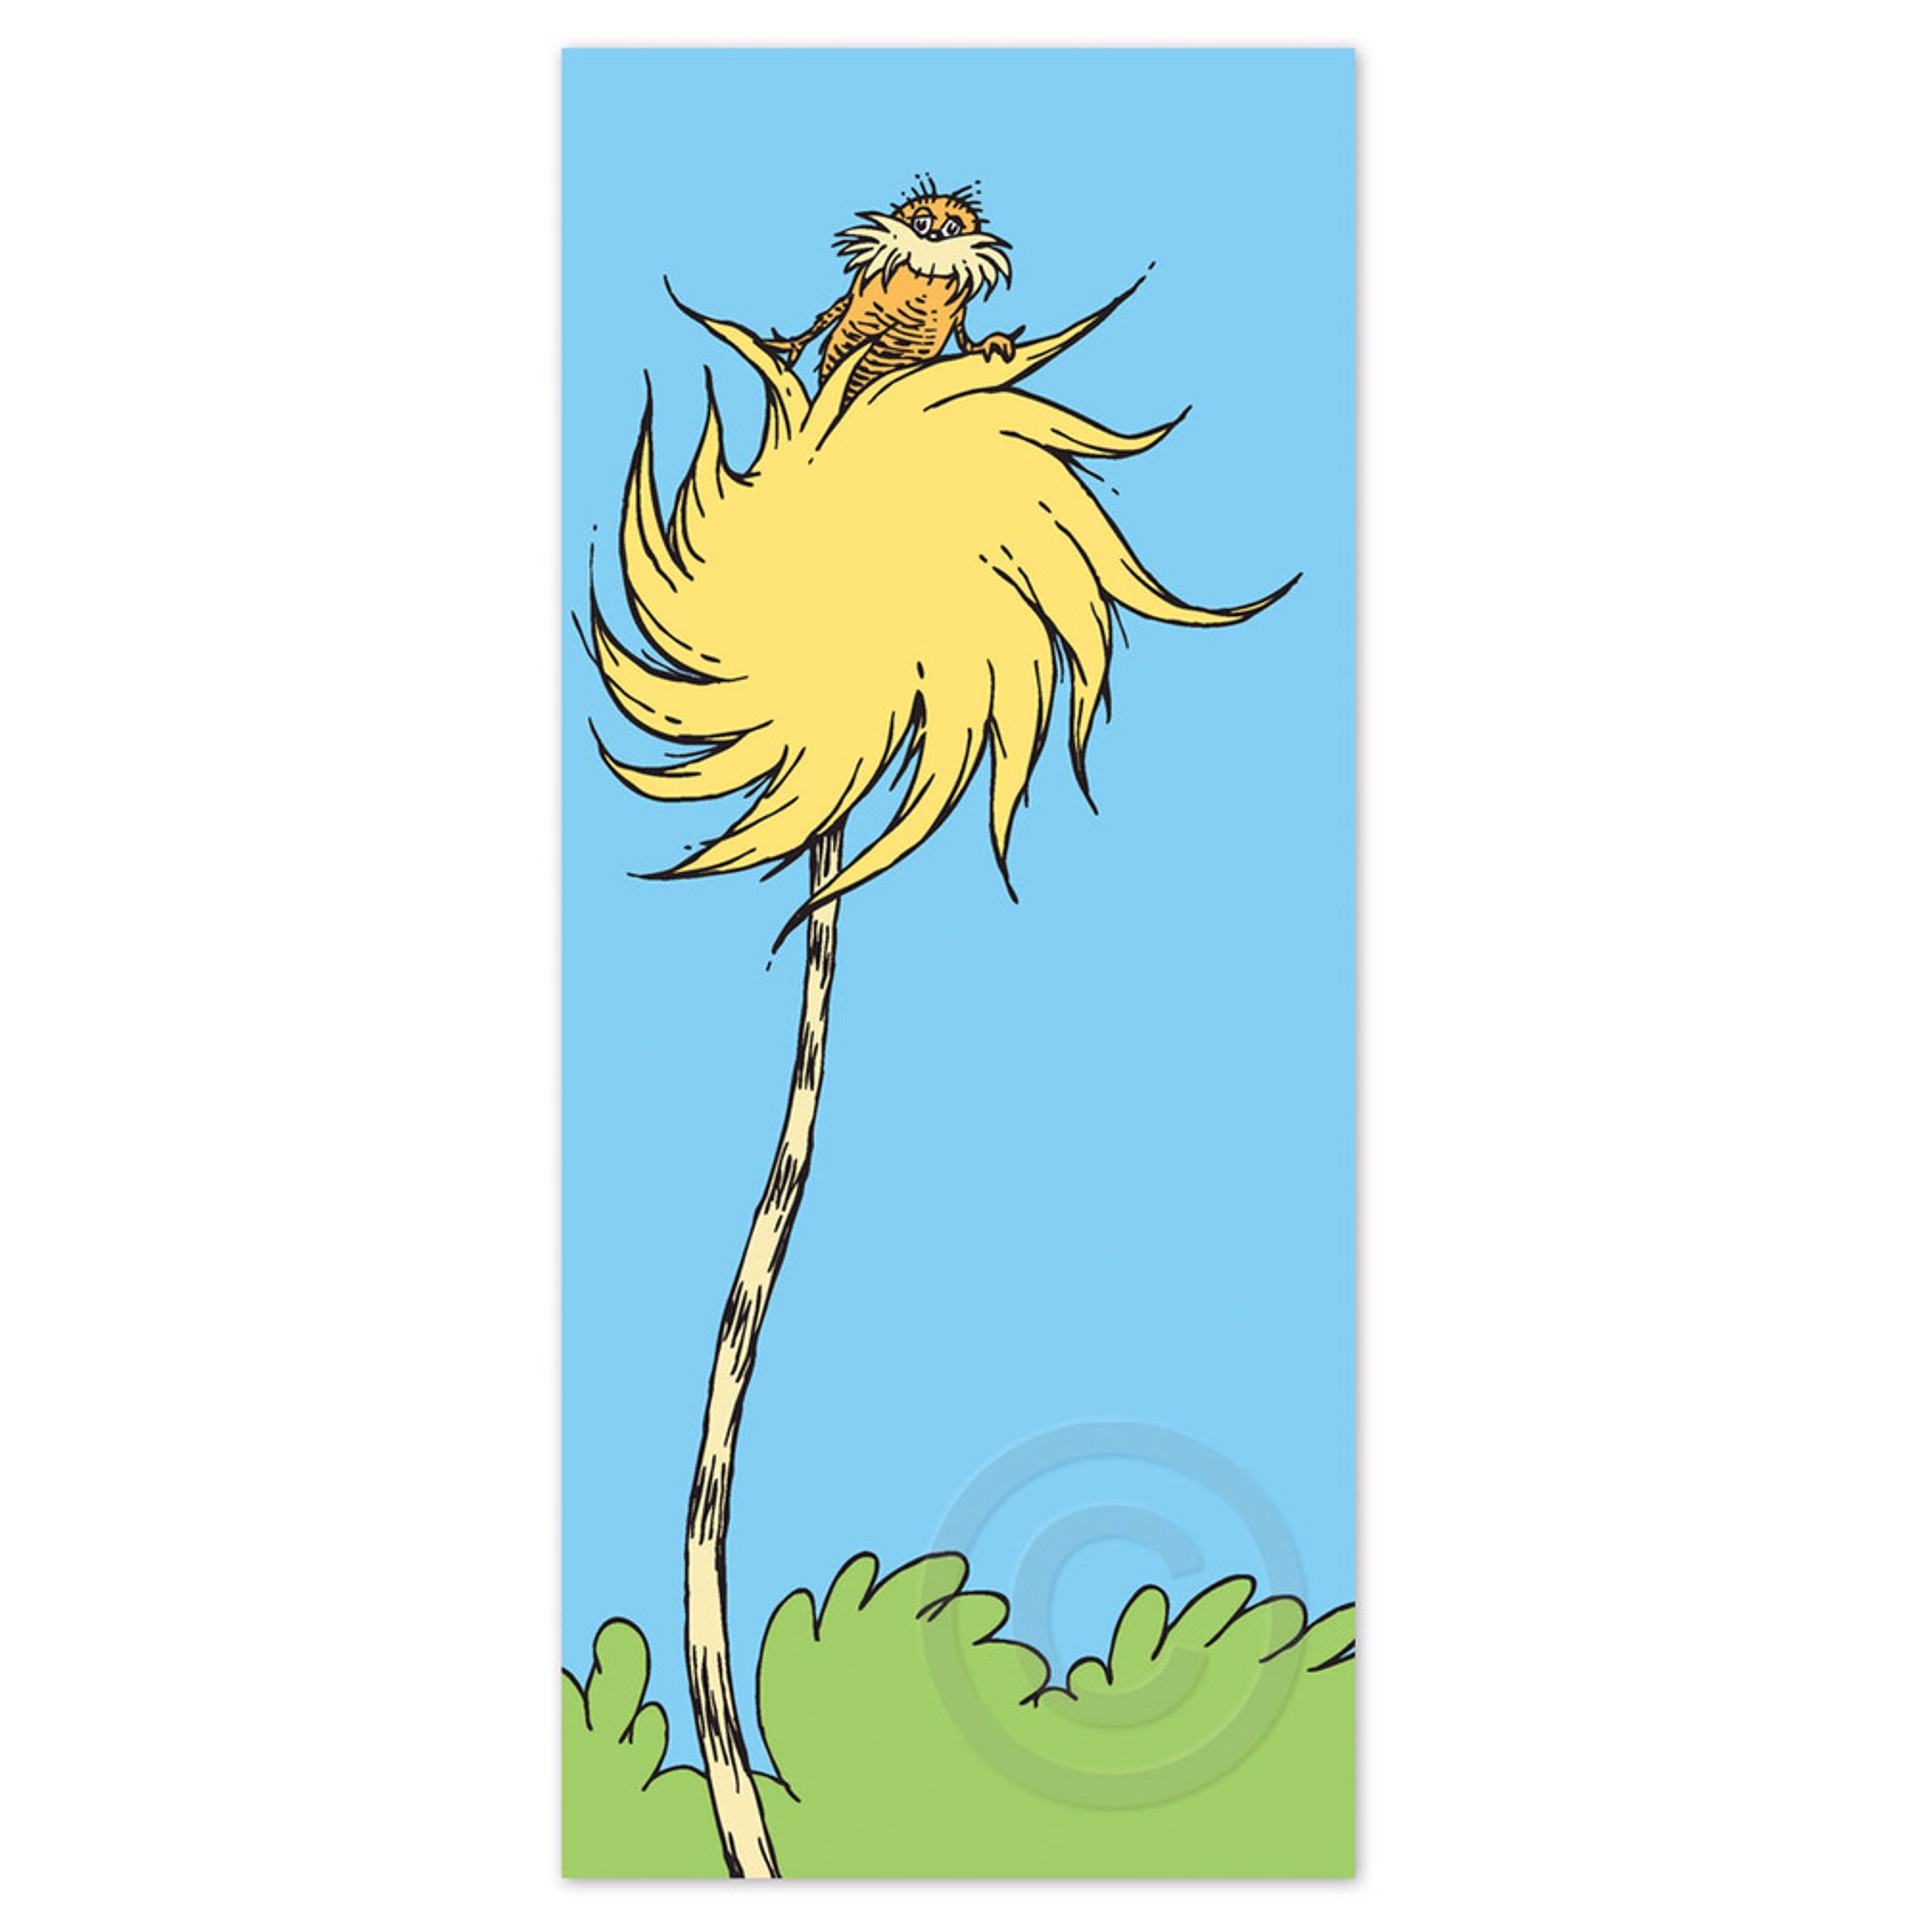 Earth Friendly Lorax (Yellow) by Dr. Seuss